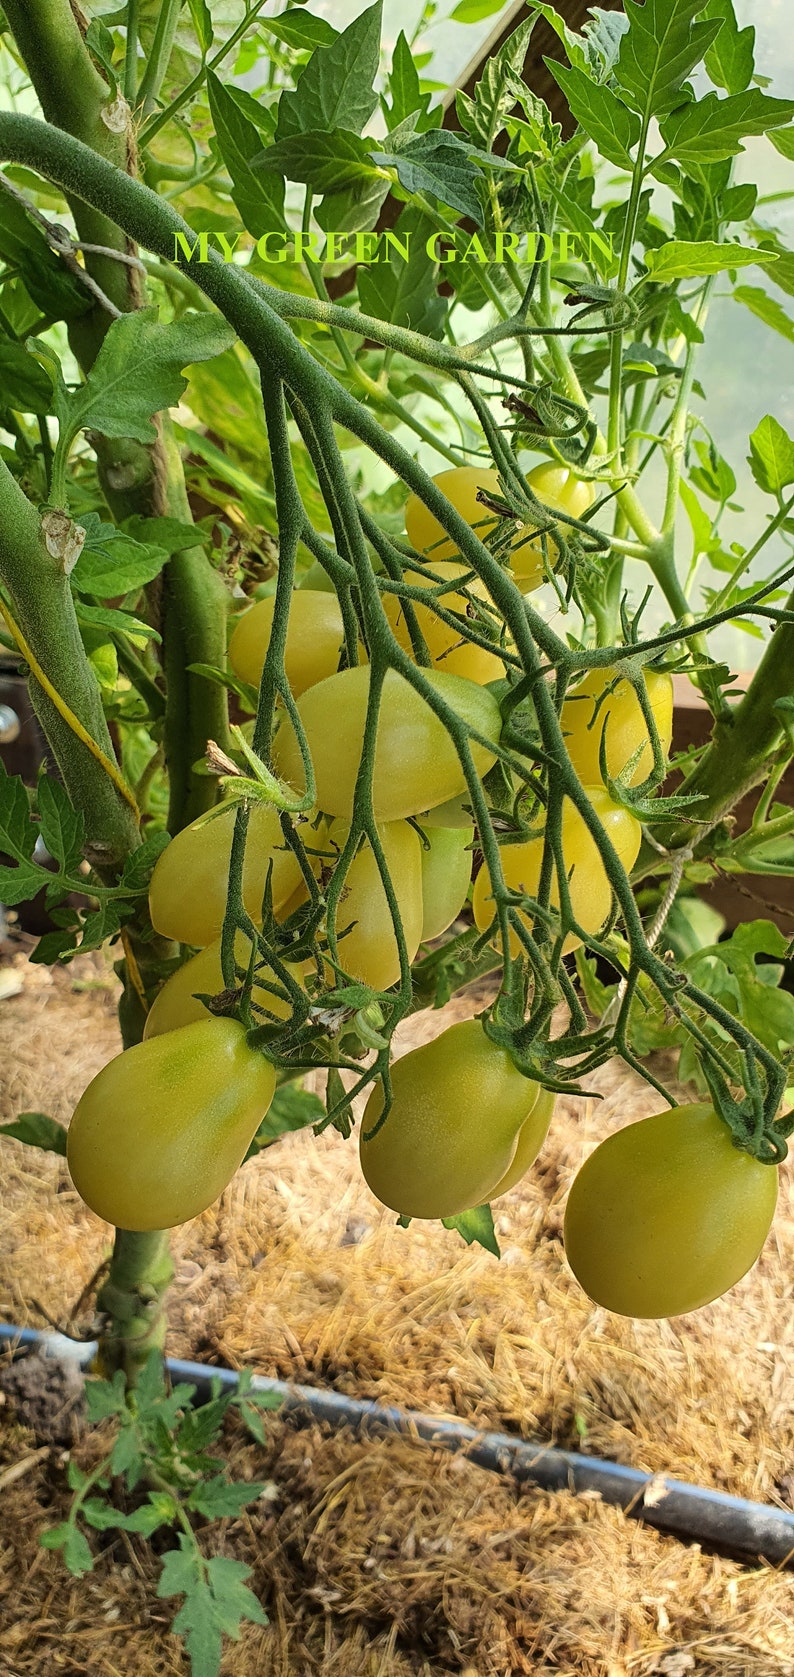 Sales for sale 10 Barry#39;s Crazy Cherry Tomato - depot Seeds tomato Organic